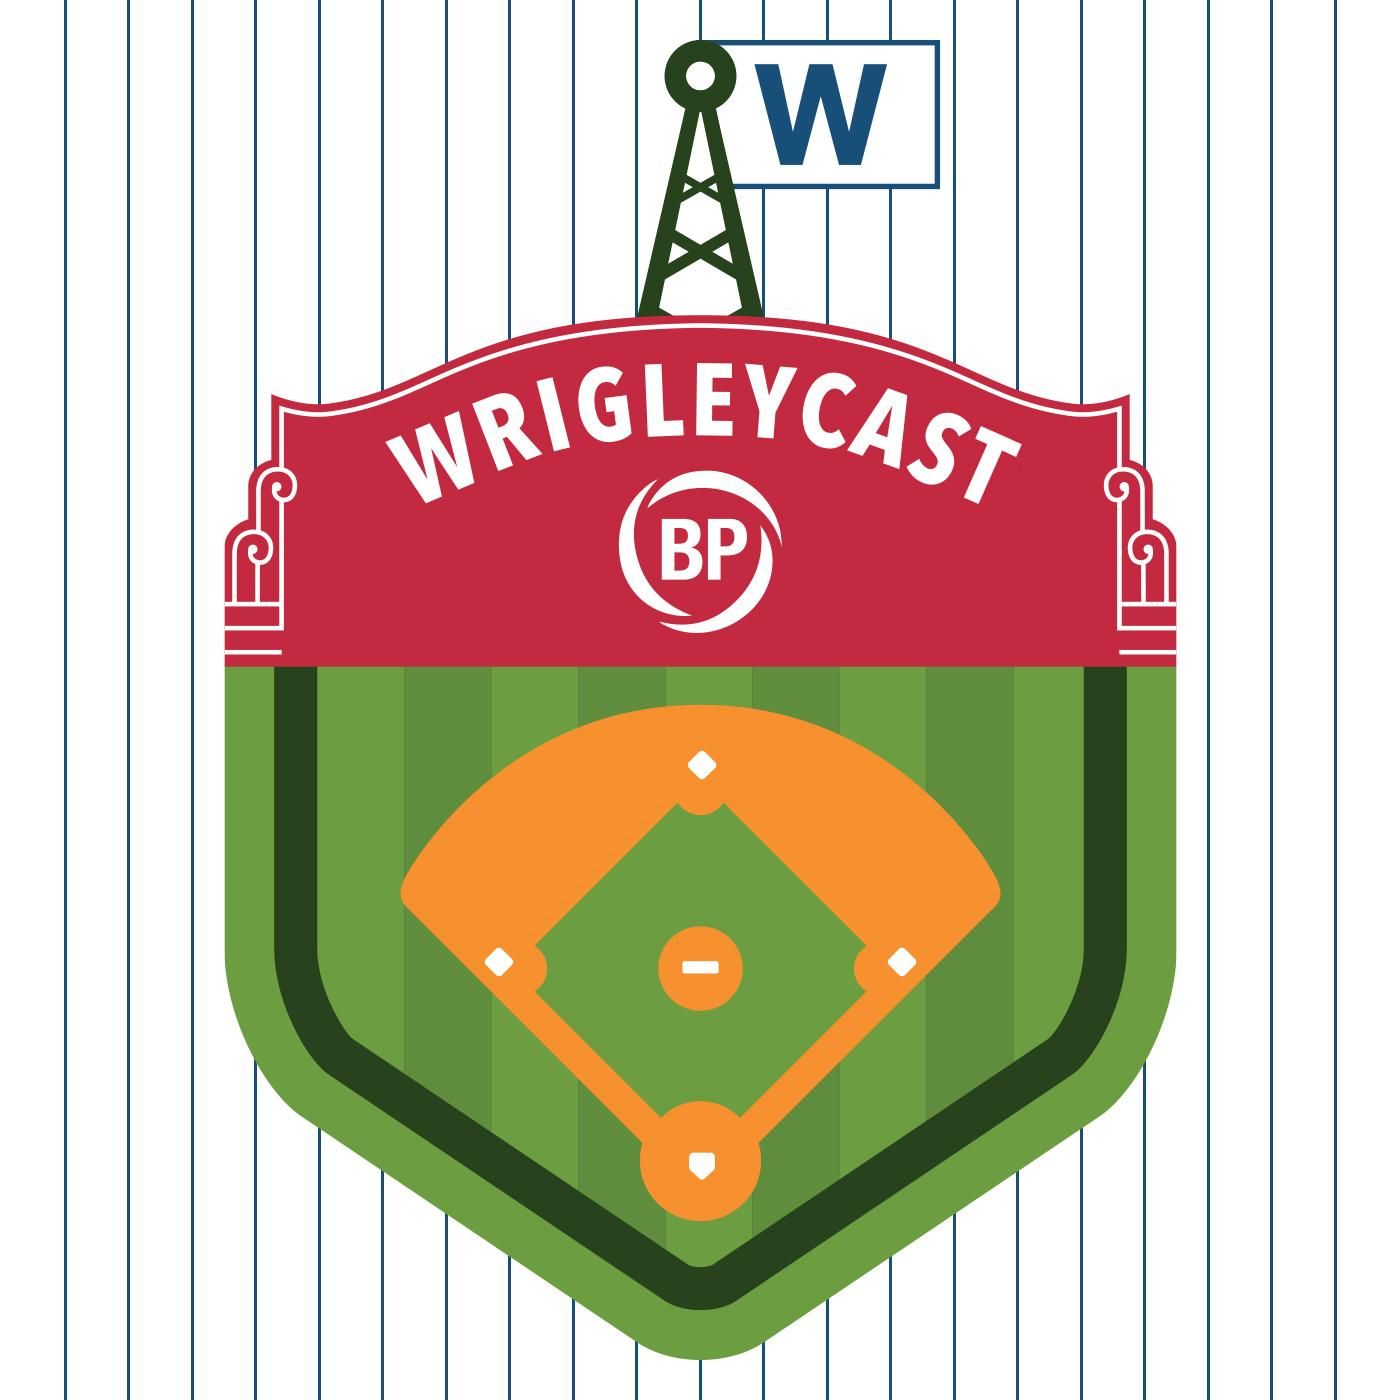 Episode 48: Winter is Coming - Cubs not good at the All Star break...or for 2018